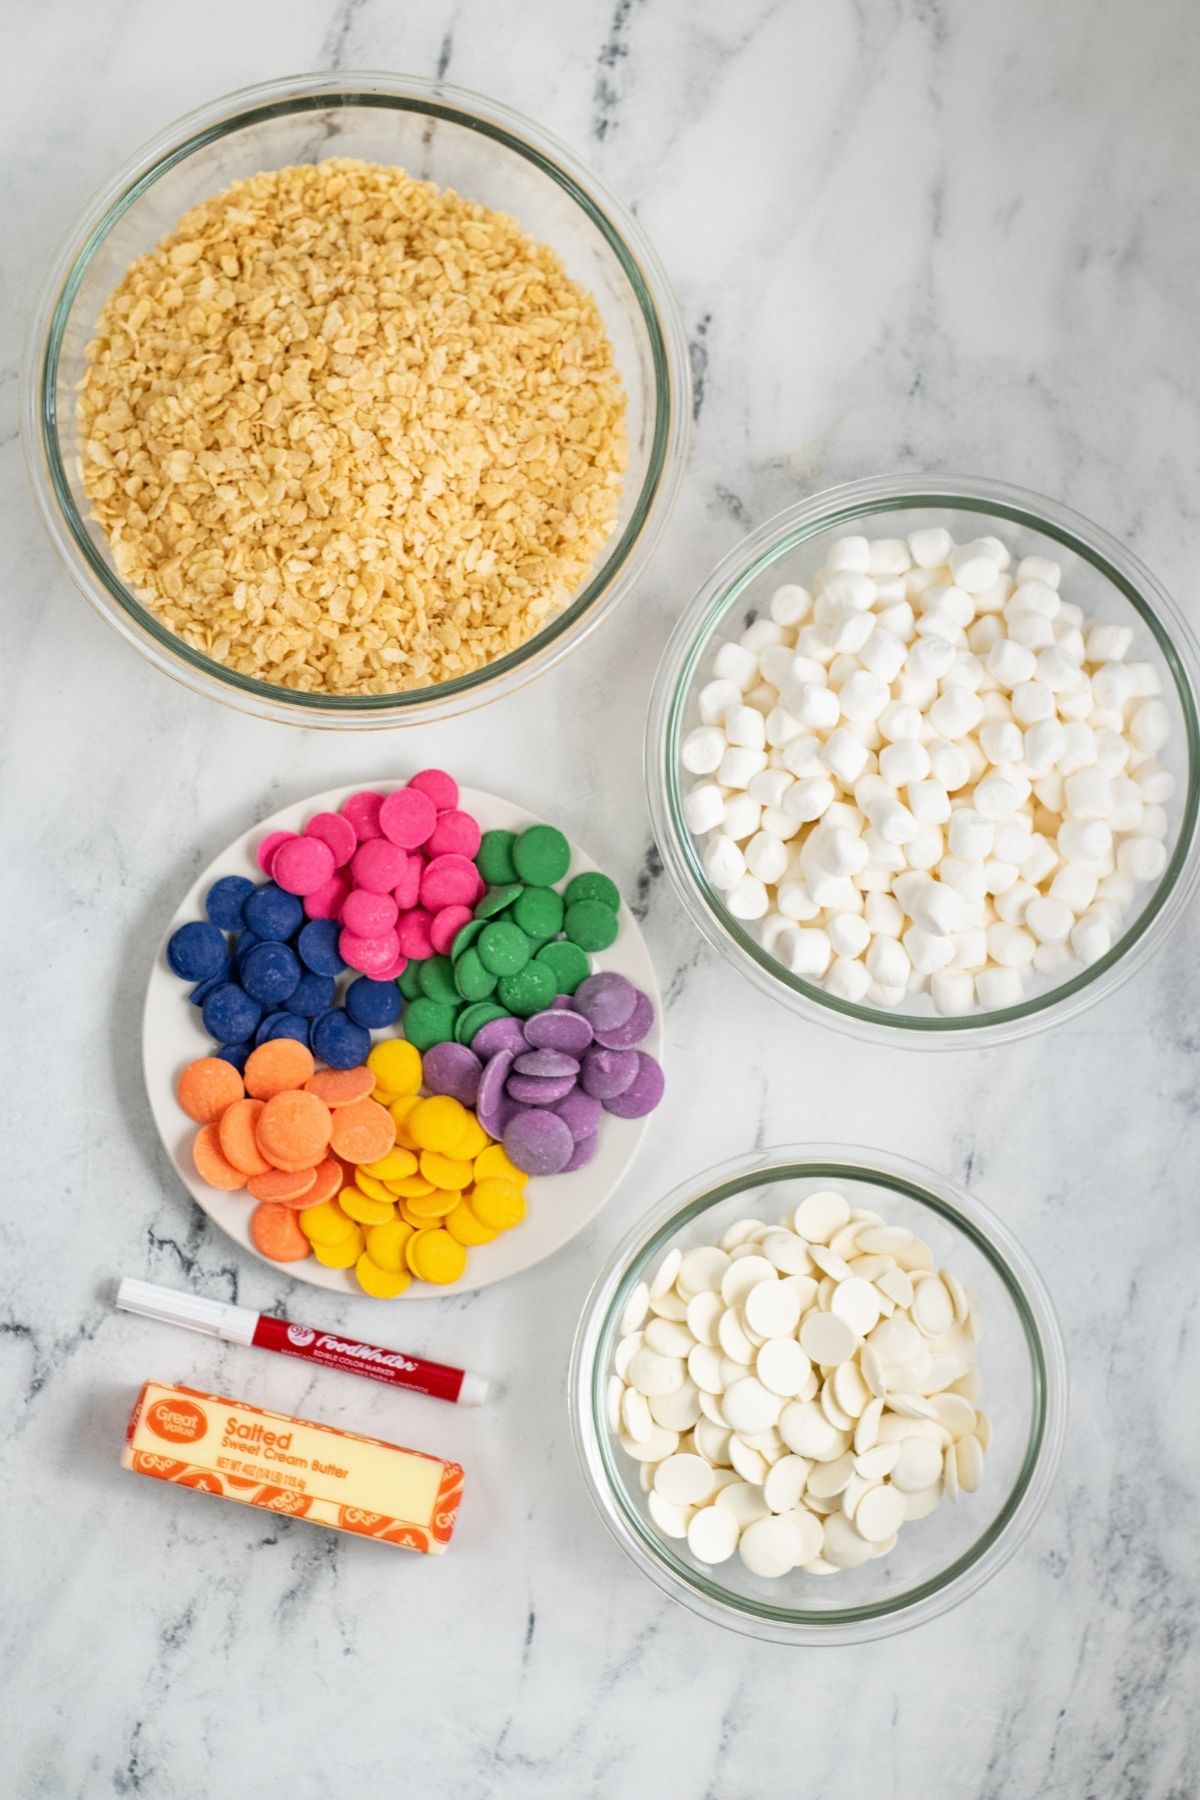 ingredients on white counter: colorful candy melts, mini marshmallows, edible ink pen, butter, bowl of rice Krispie cereal